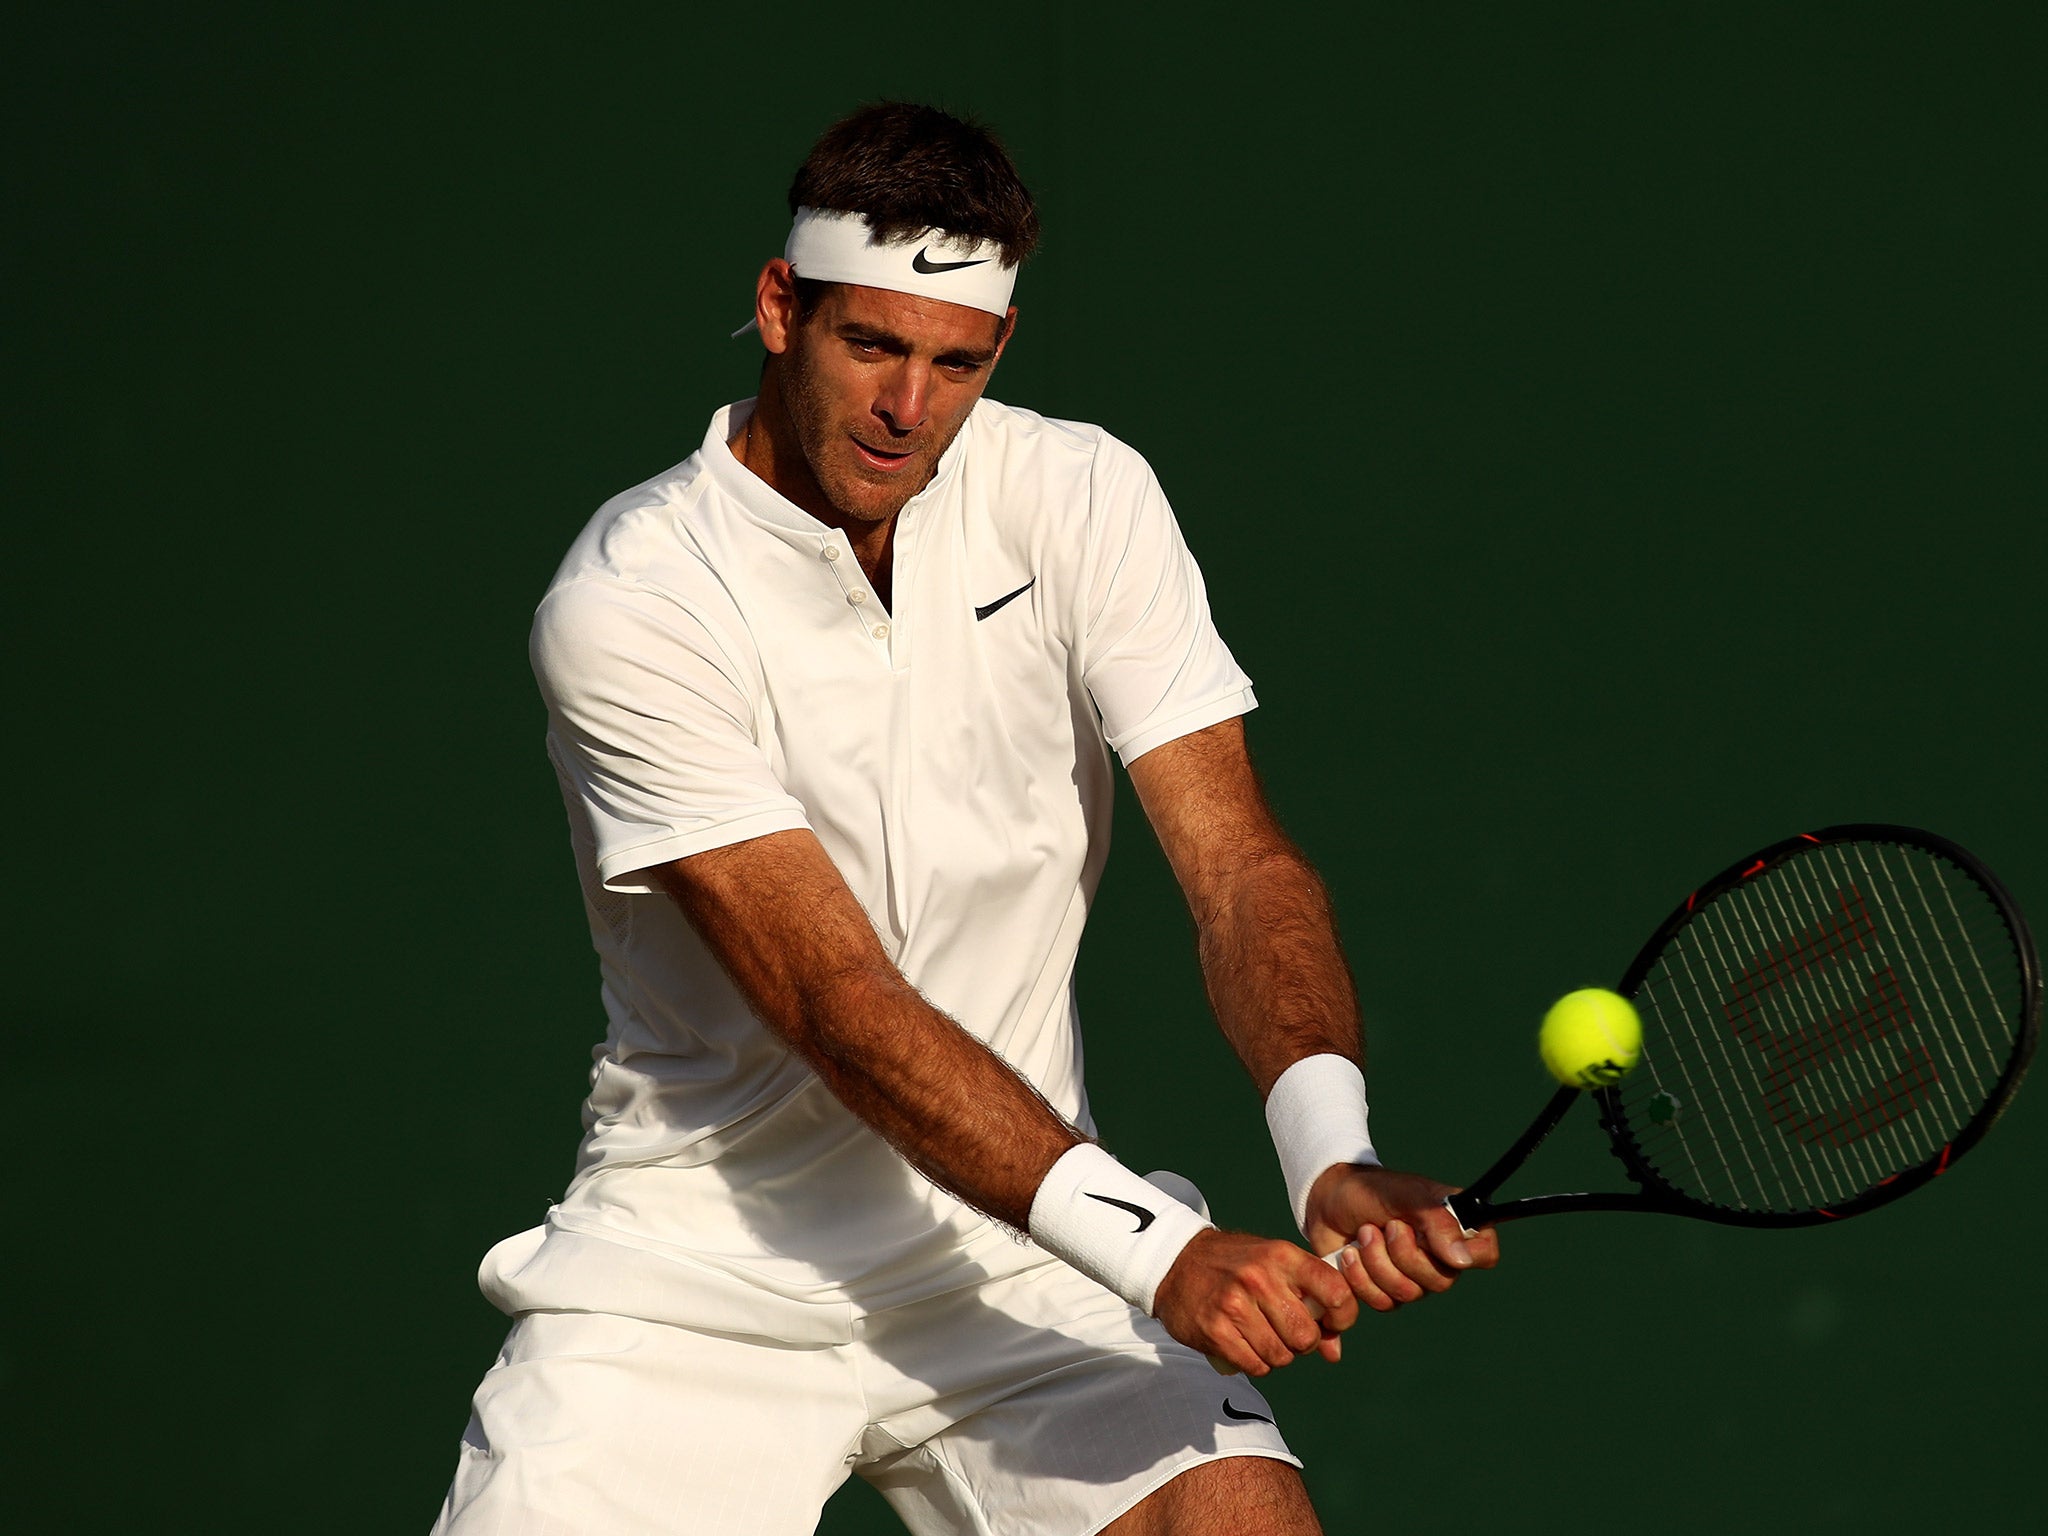 Juan Martin Del Potro's campaign came to an end in defeat by Lucas Pouille